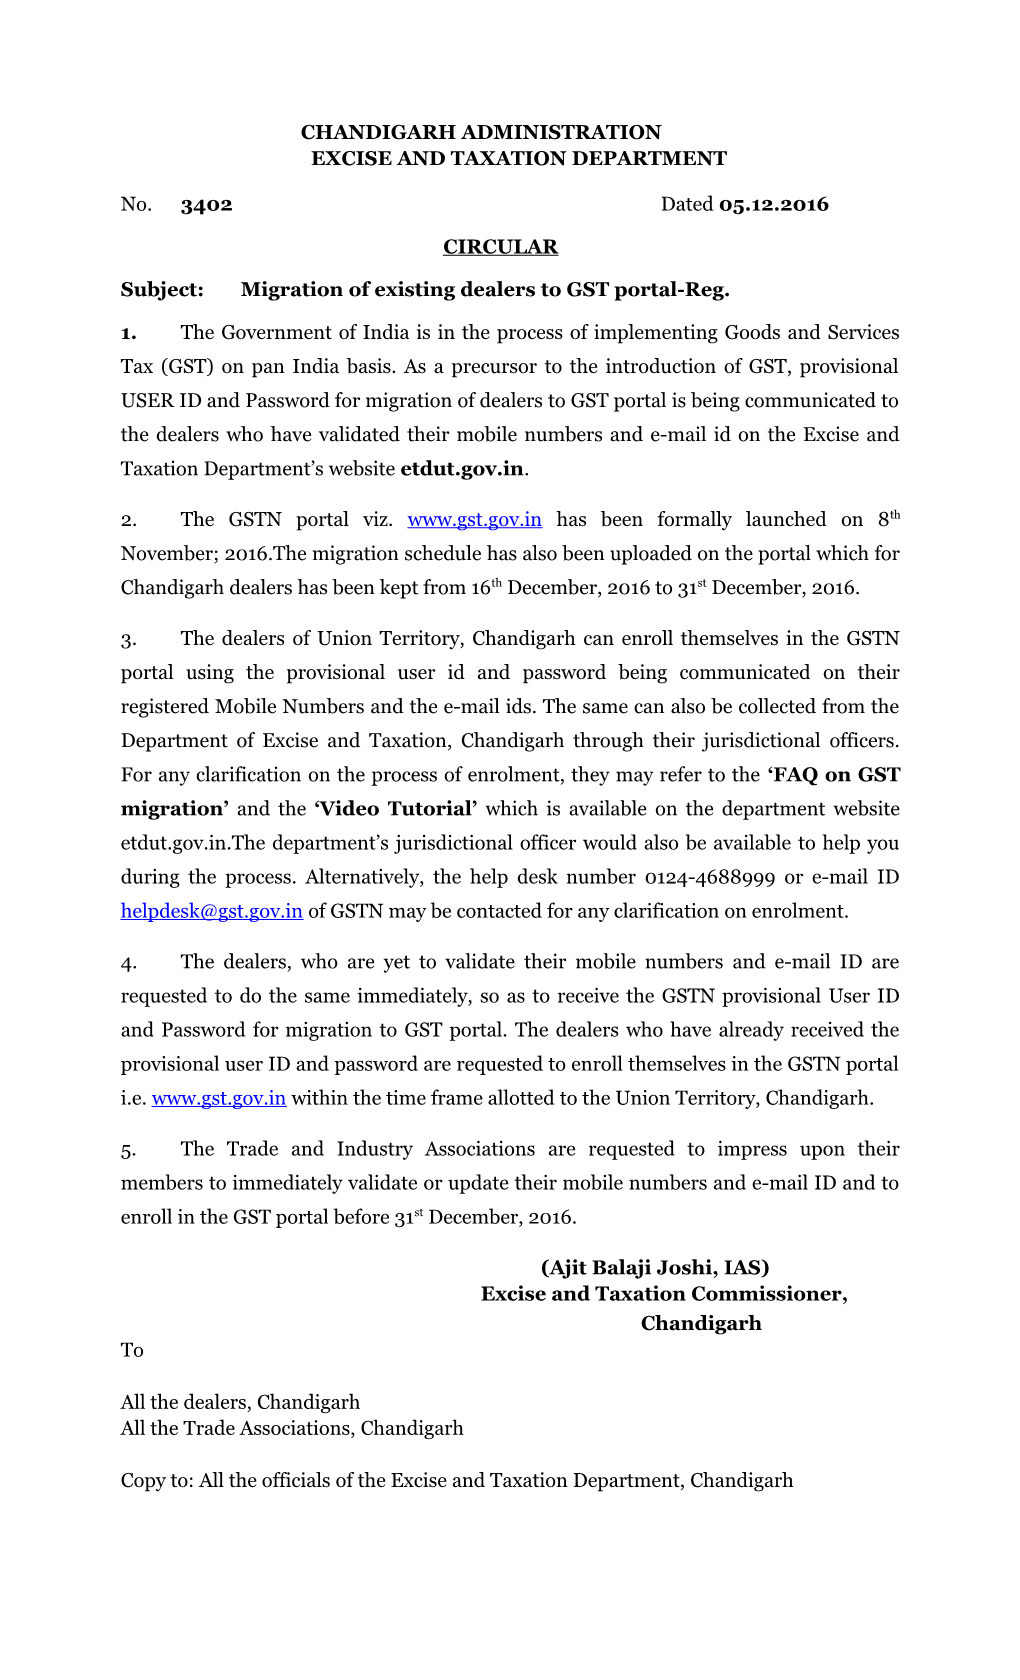 Subject: Migration of Existing Dealers to GST Portal-Reg